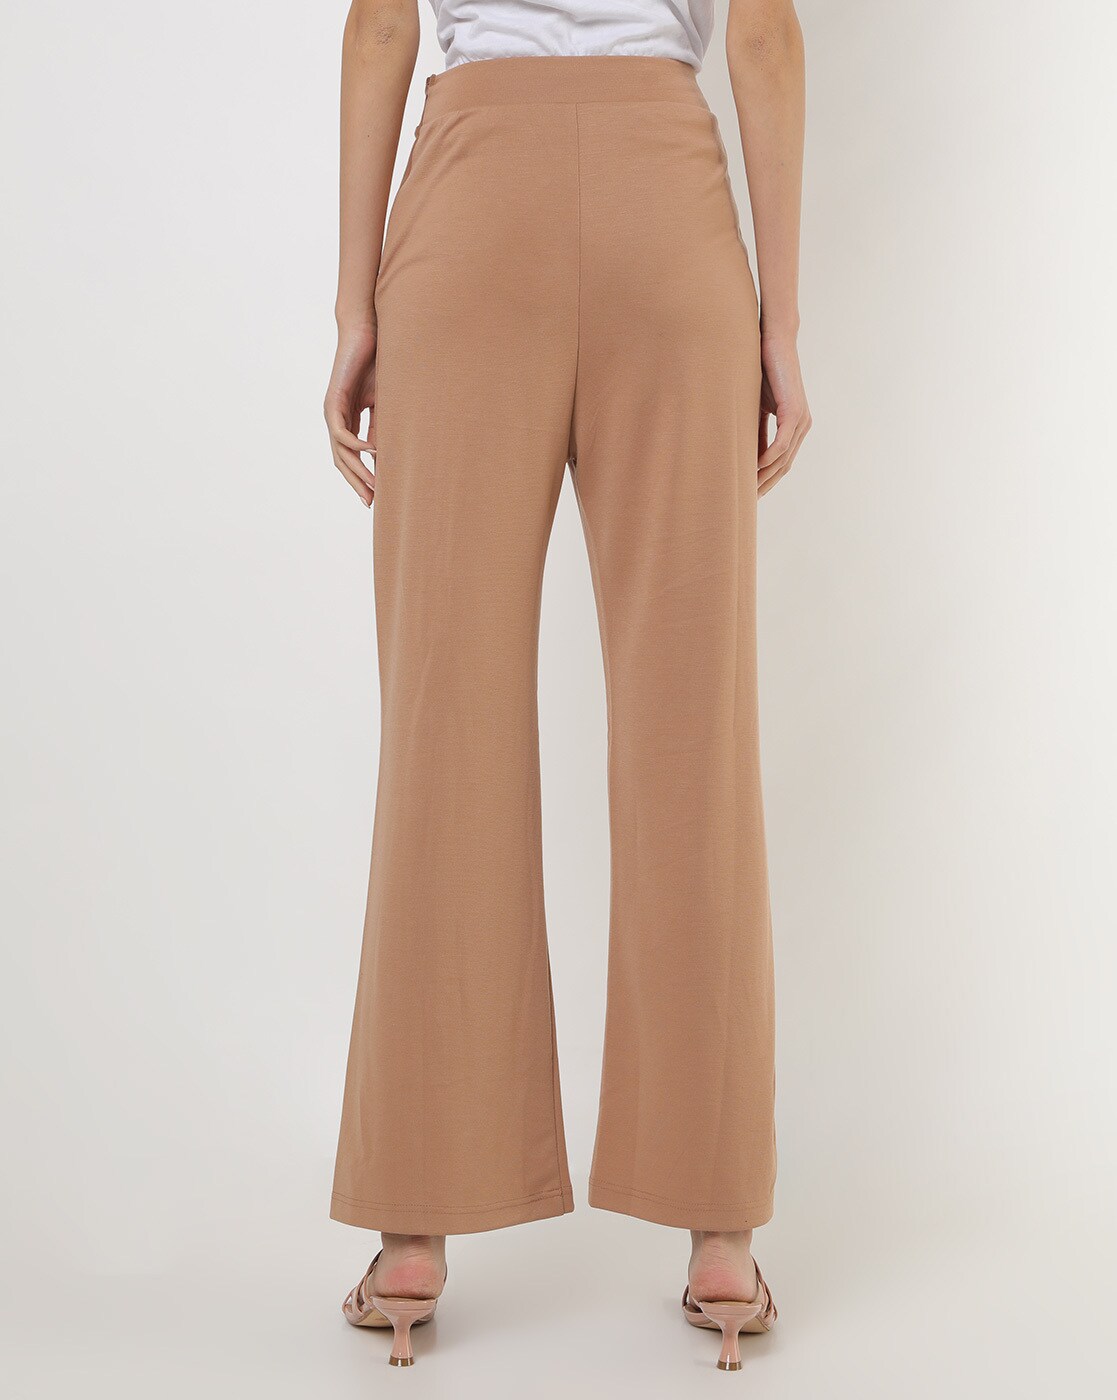 Flowing Trousers for Women  Explore our New Arrivals  ZARA India